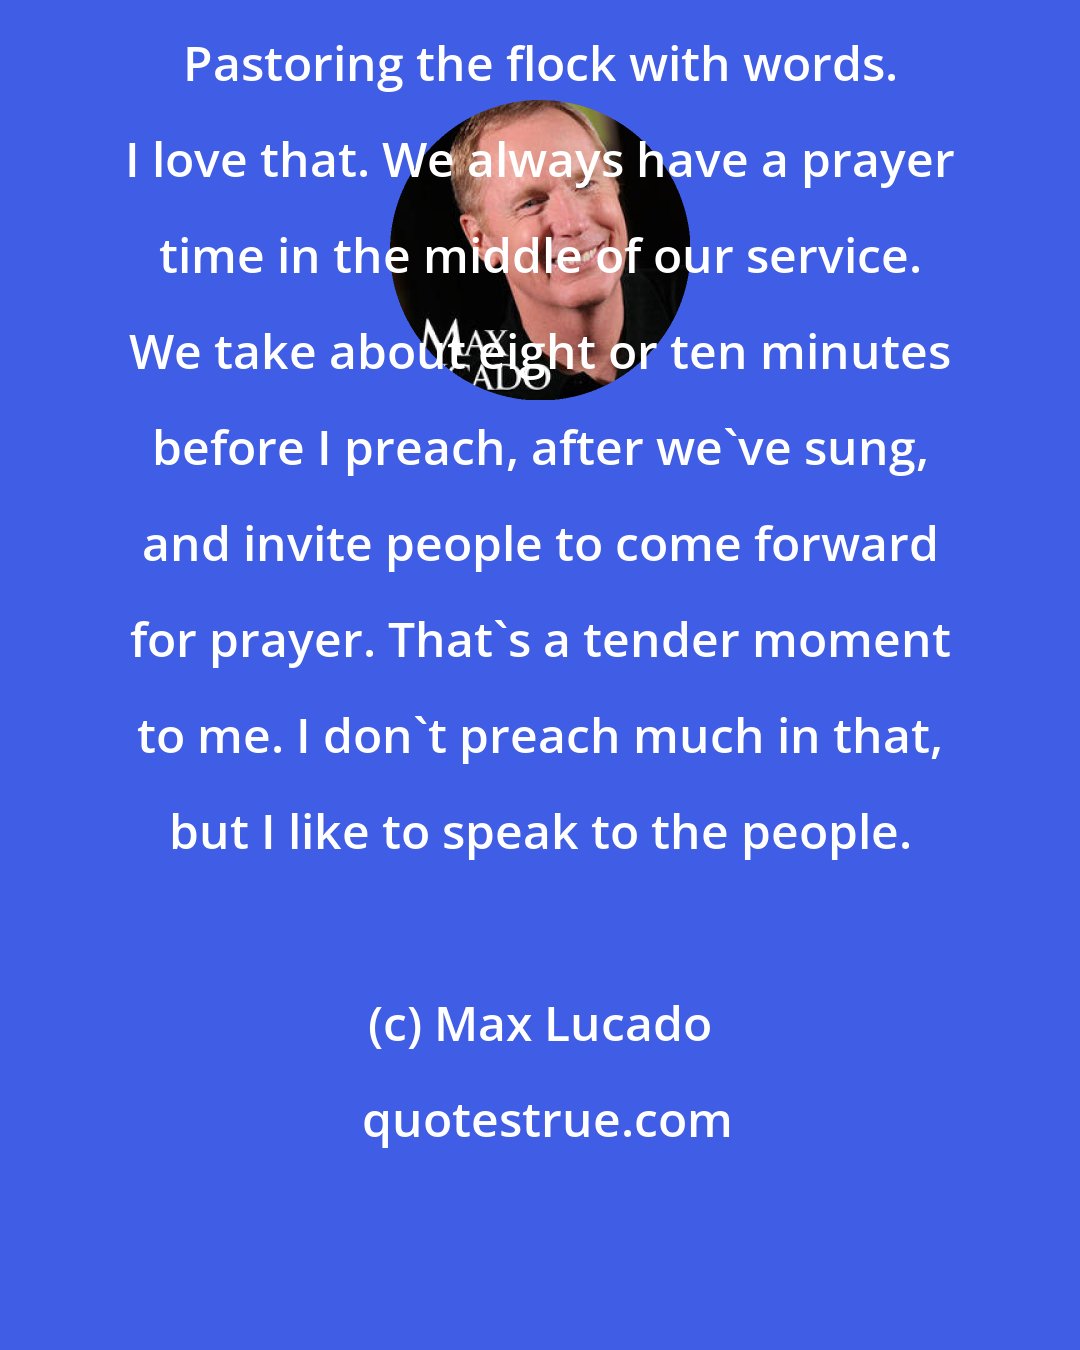 Max Lucado: Pastoring the flock with words. I love that. We always have a prayer time in the middle of our service. We take about eight or ten minutes before I preach, after we've sung, and invite people to come forward for prayer. That's a tender moment to me. I don't preach much in that, but I like to speak to the people.